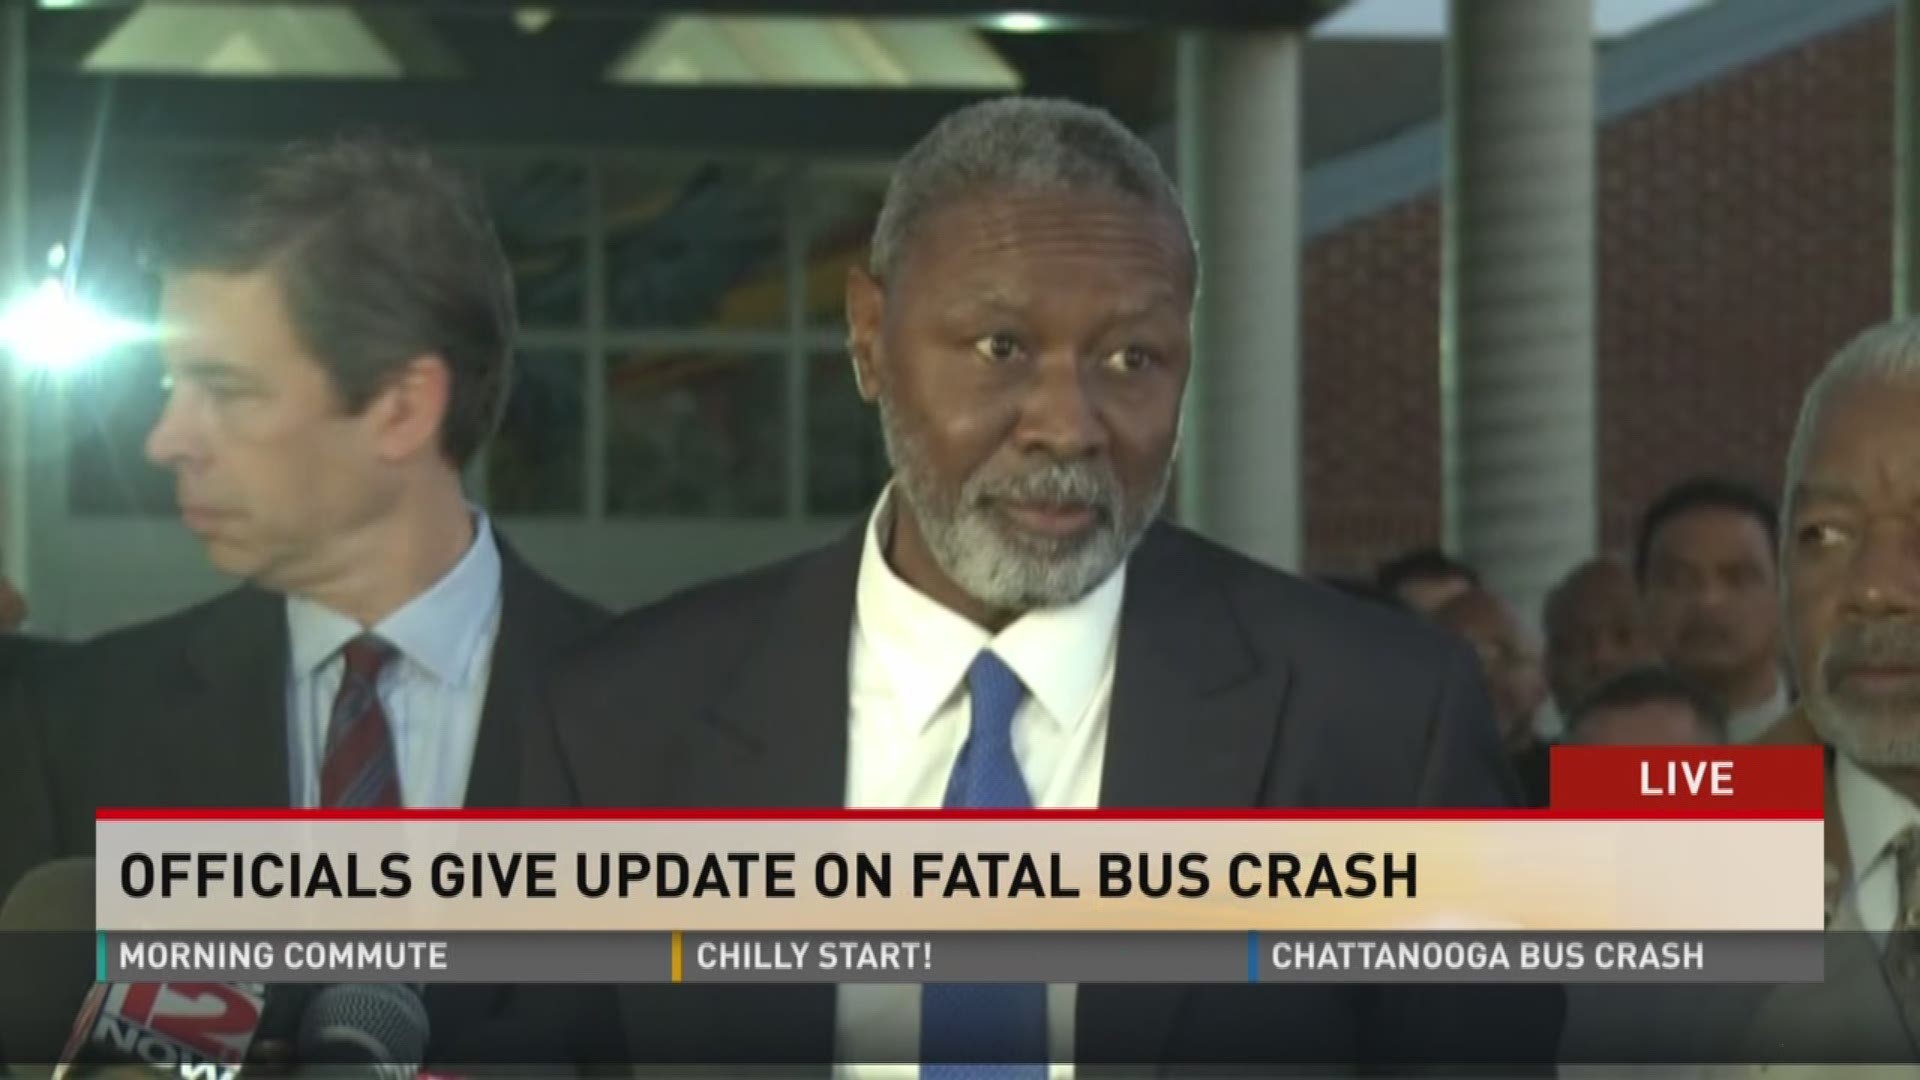 Officials gave an update on a deadly school bus crash that killed 5 students.